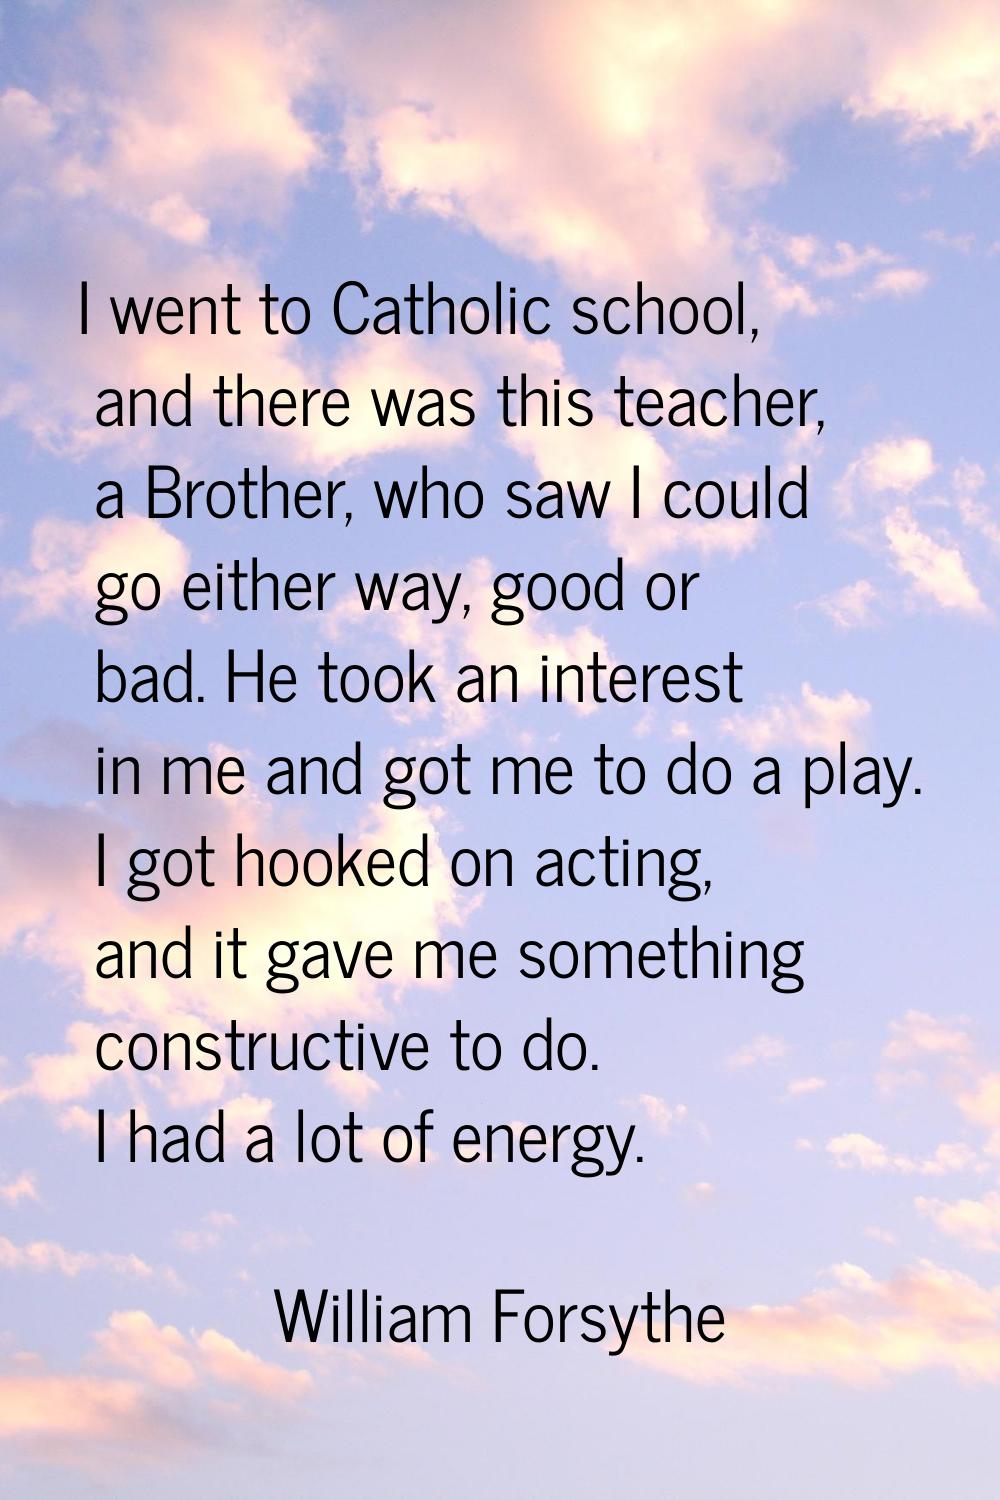 I went to Catholic school, and there was this teacher, a Brother, who saw I could go either way, go